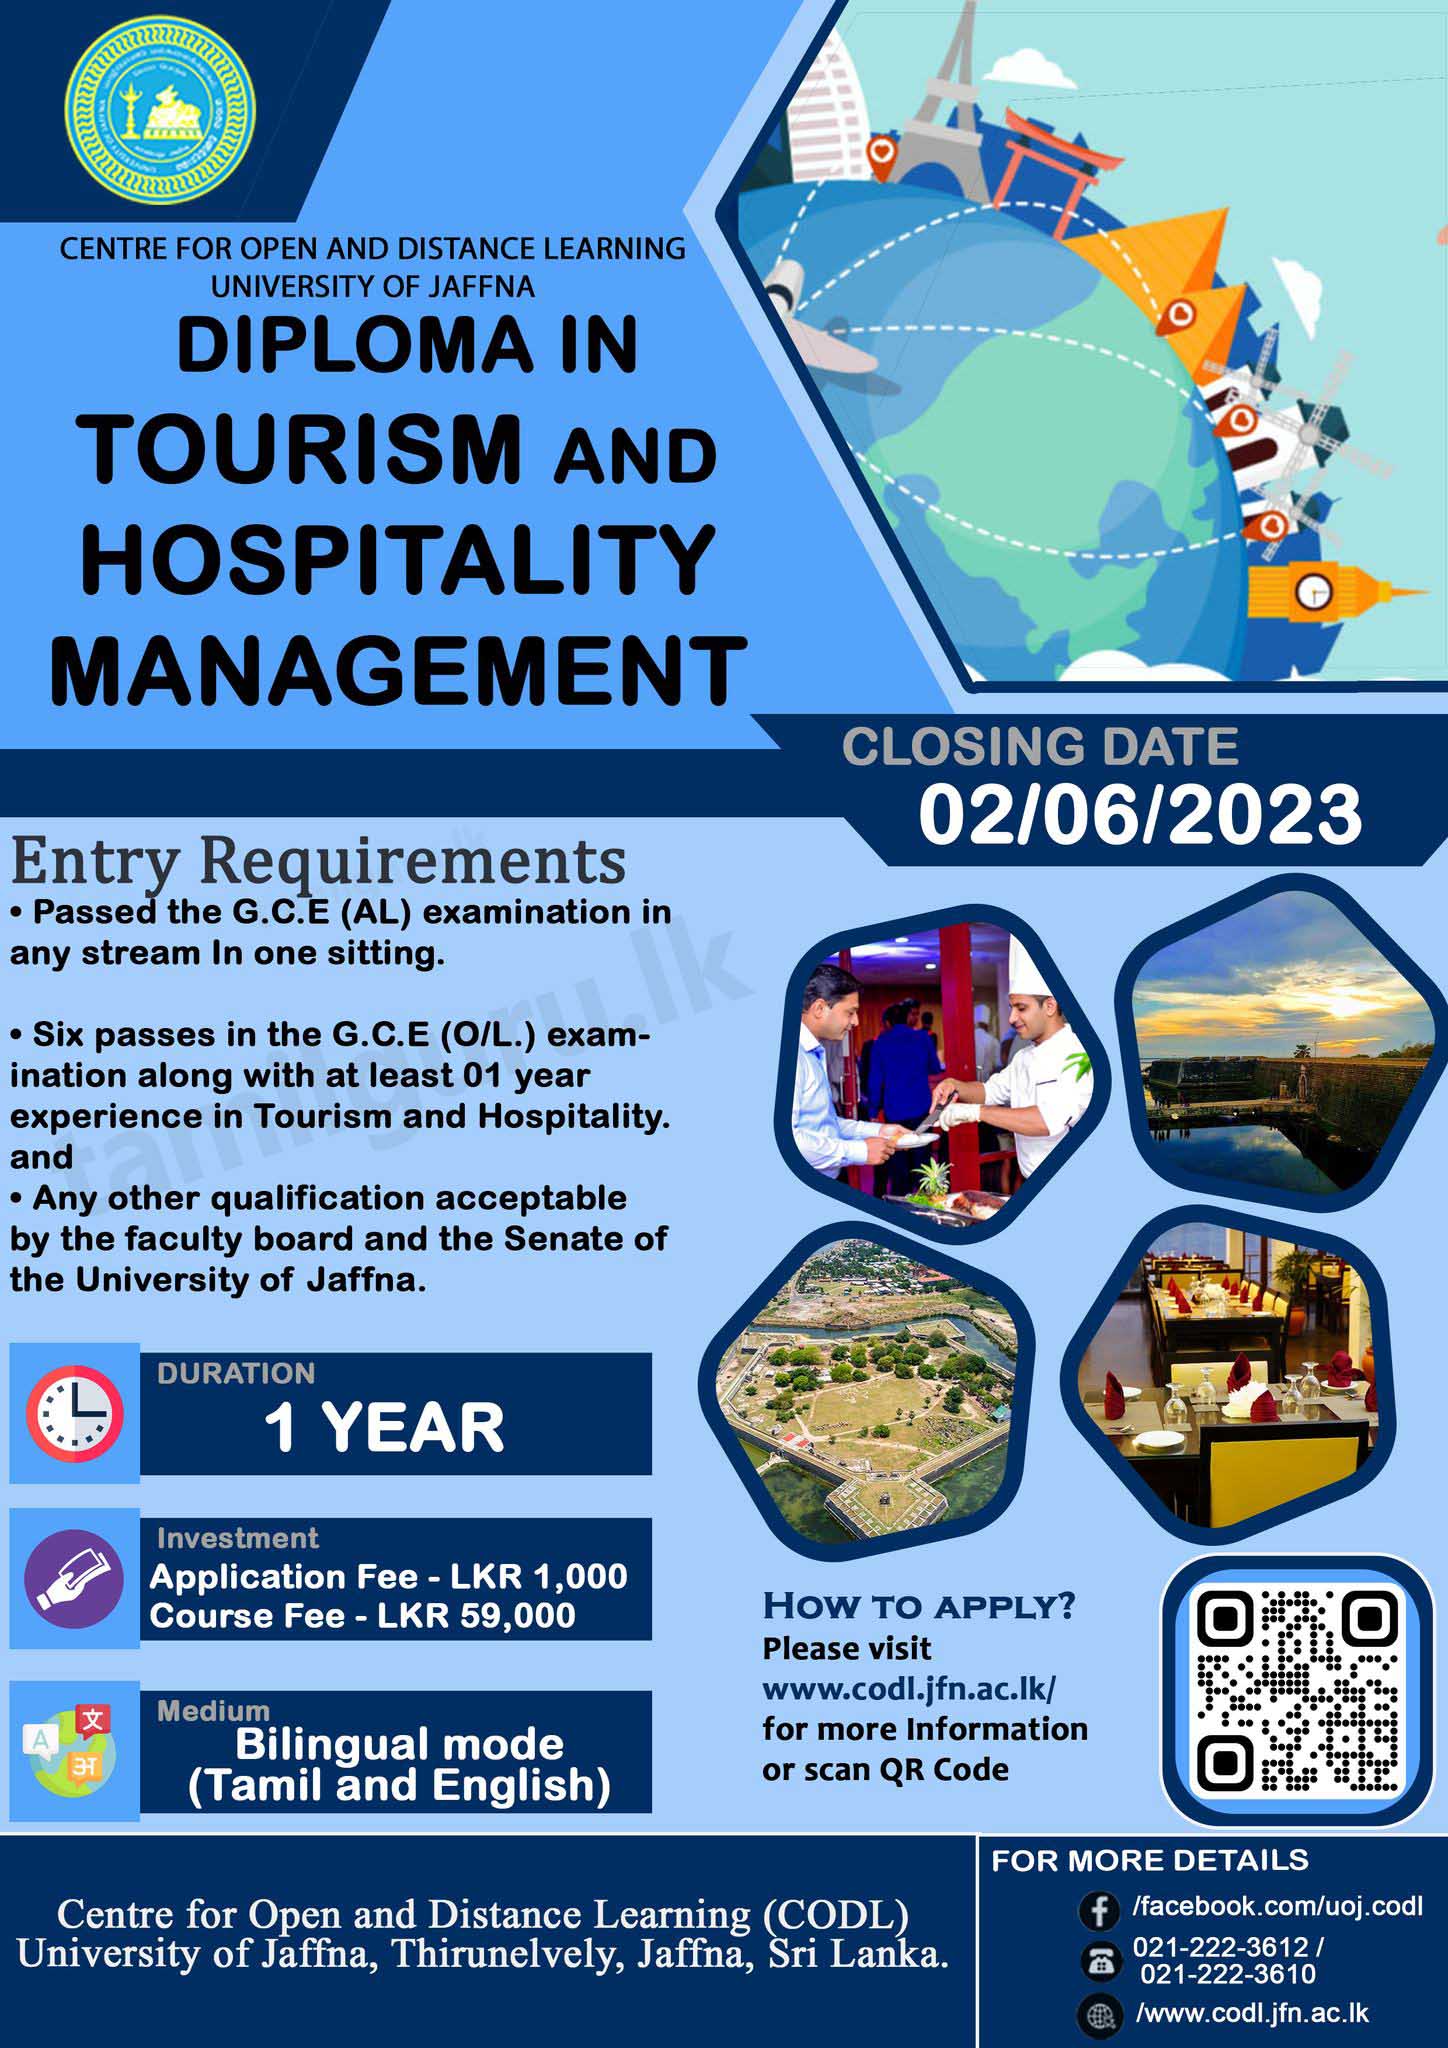 Diploma in Tourism and Hospitality Management 2023 - University of Jaffna